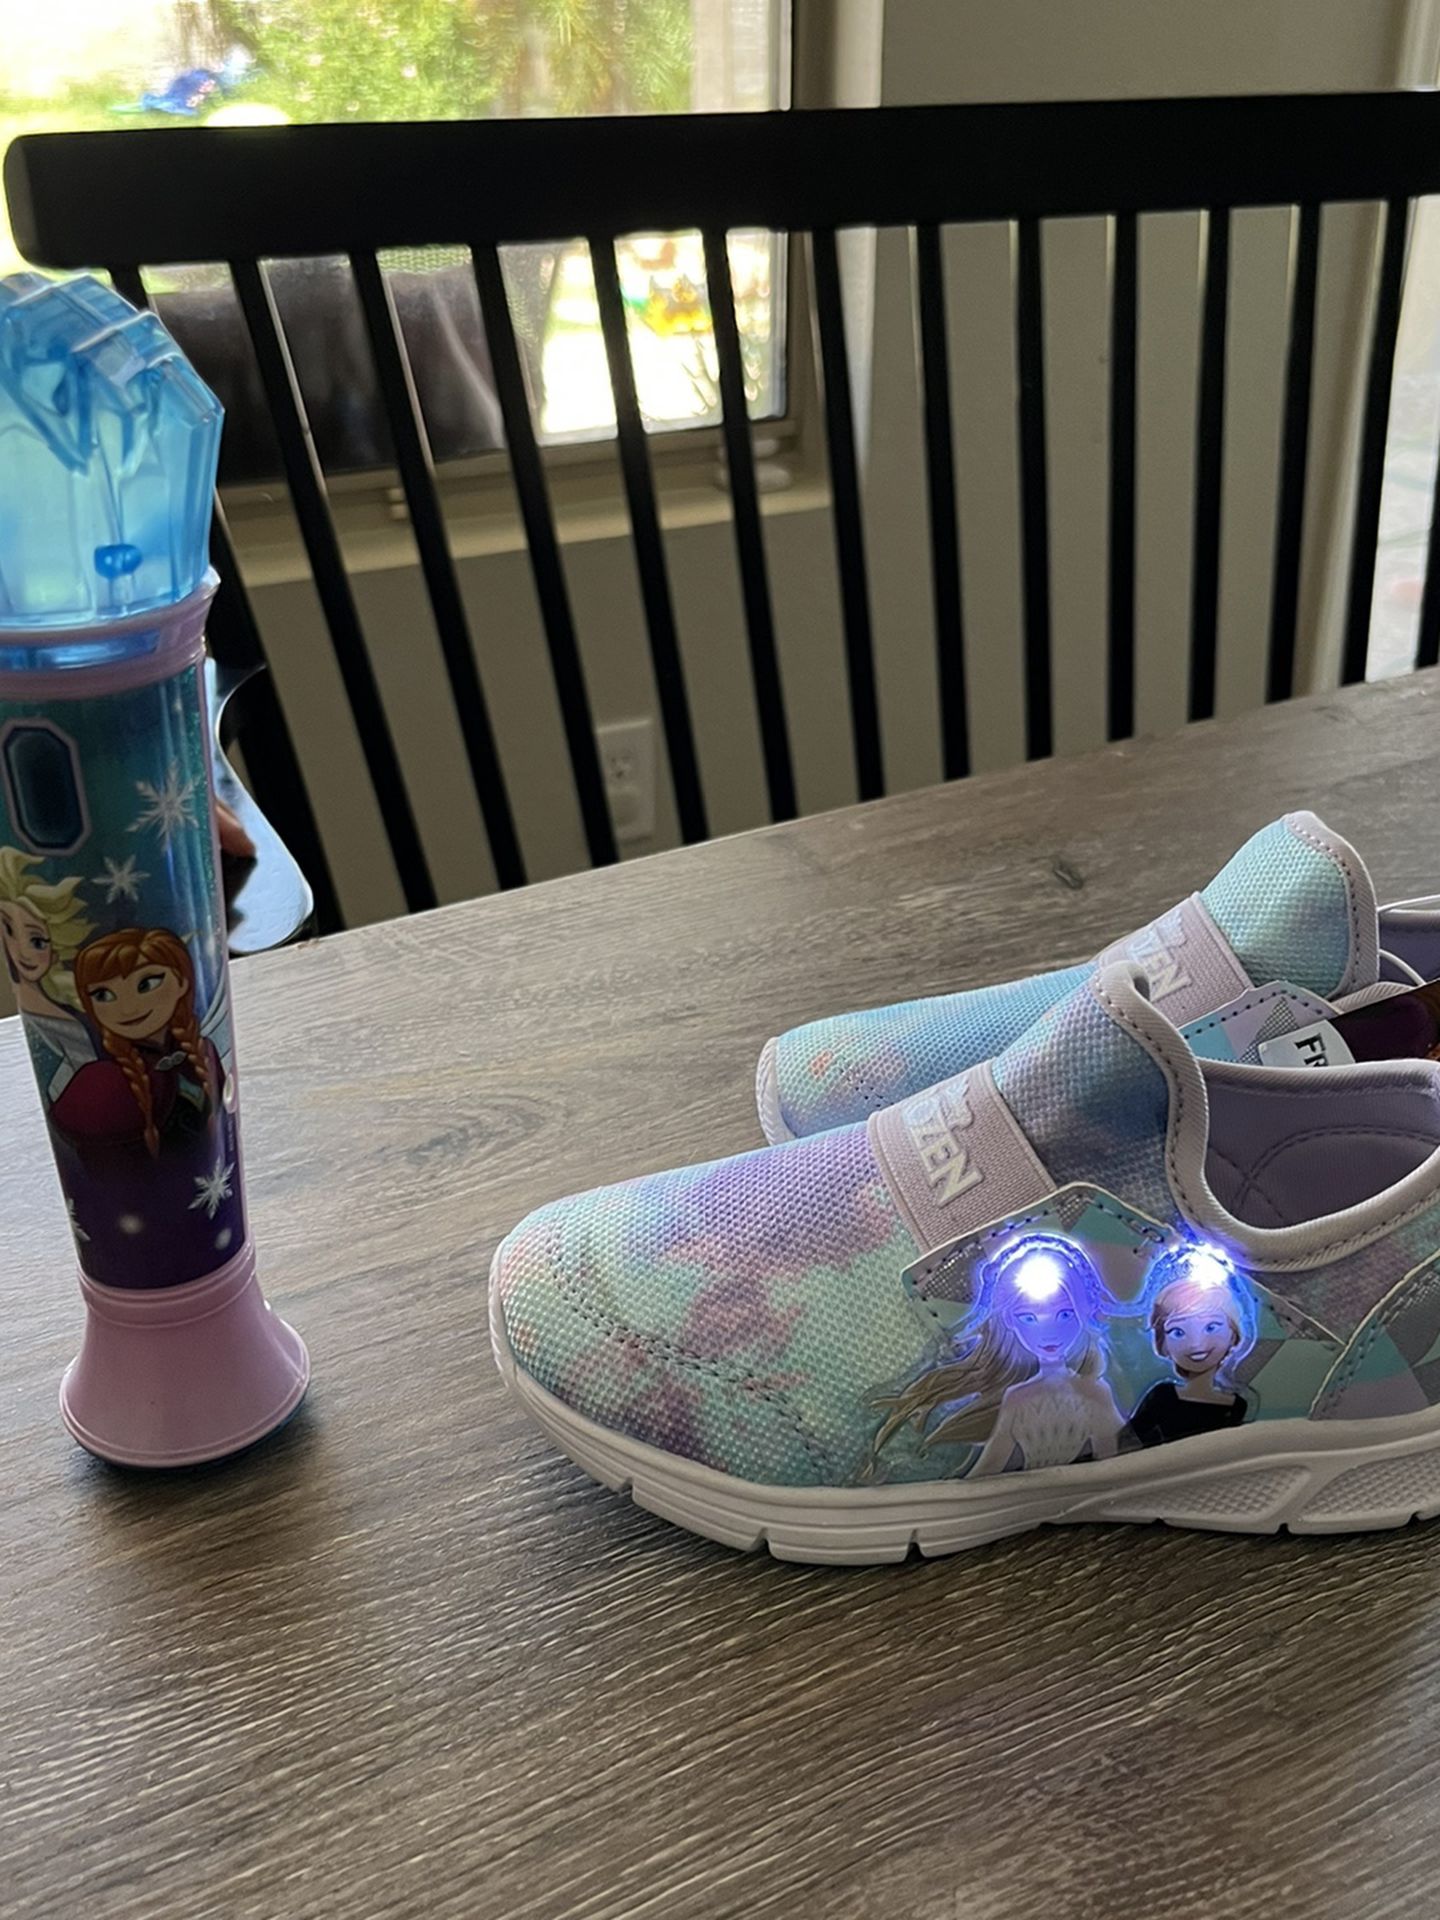 New Frozen Shoes And Music Playing Microphone